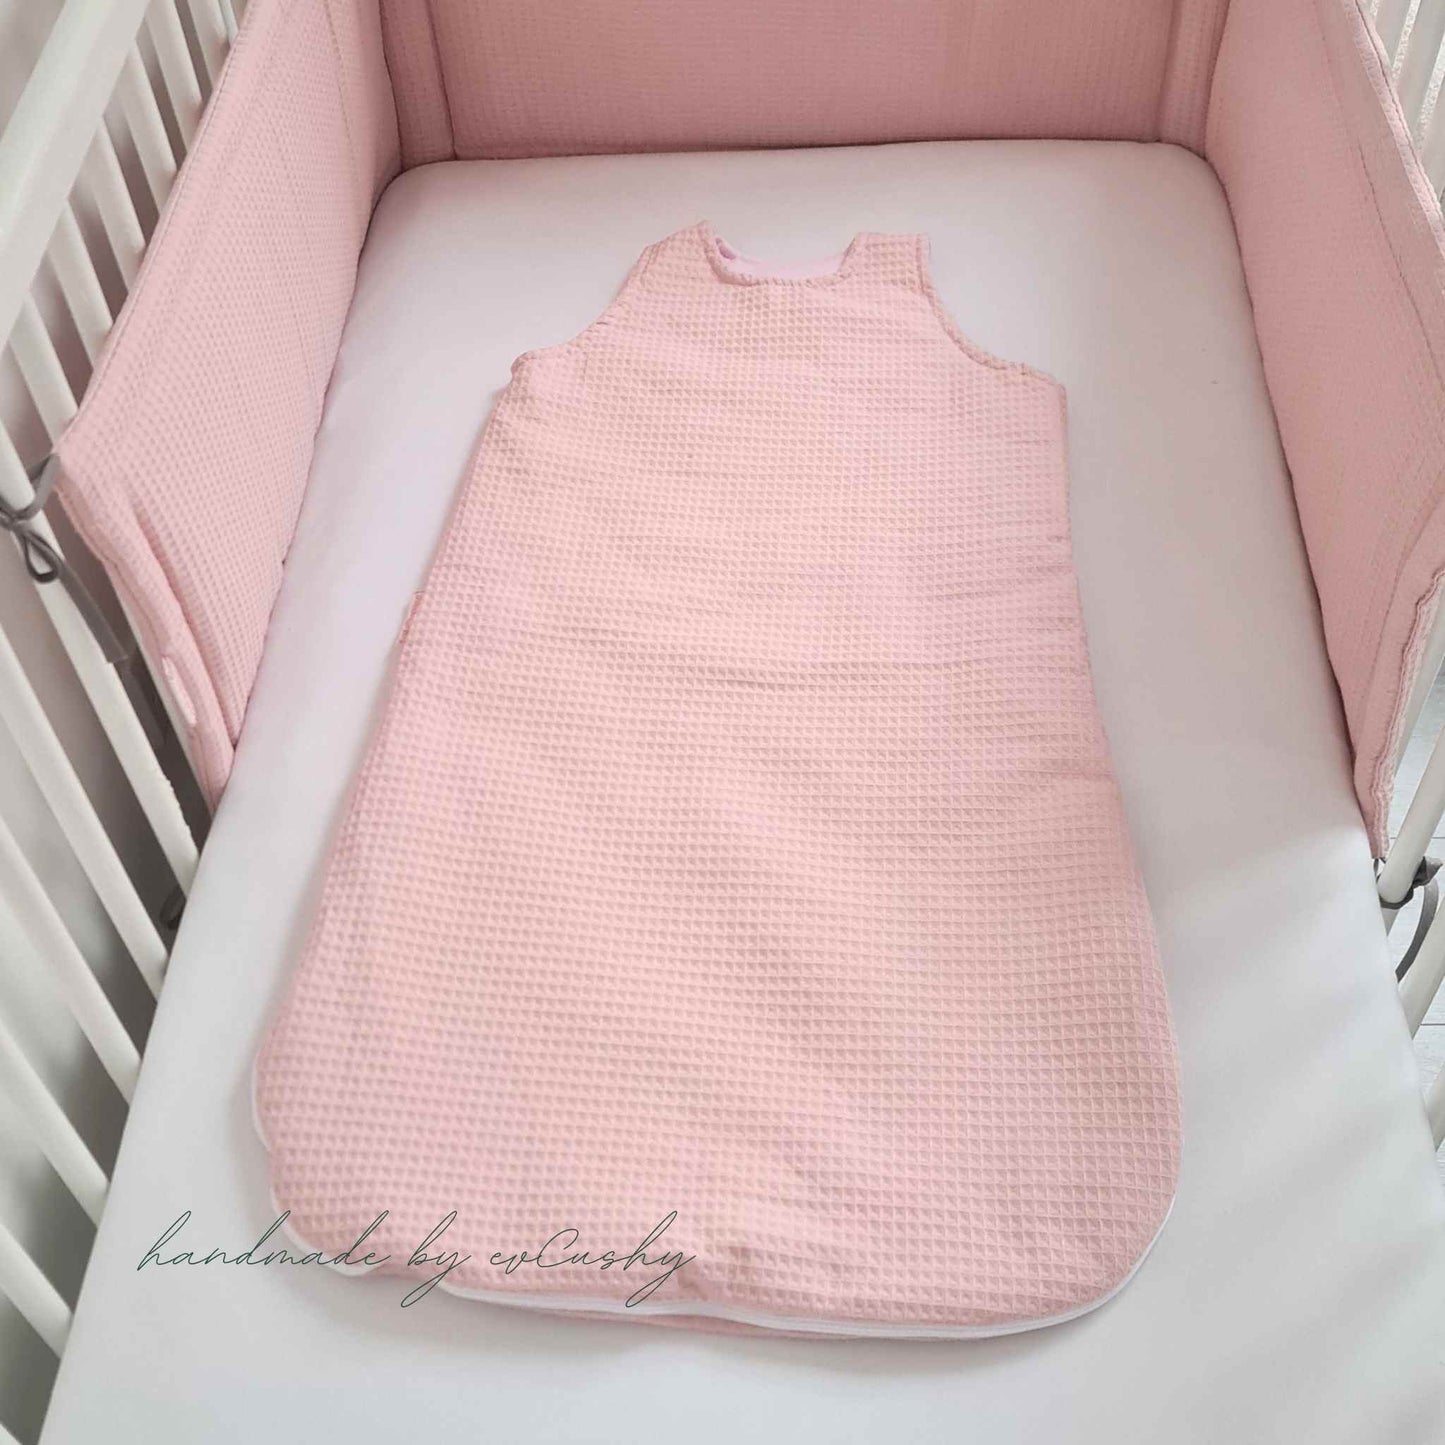 plain sleeping bag for baby pink , 100% cotton 6-18 months in Ireland 90cm long